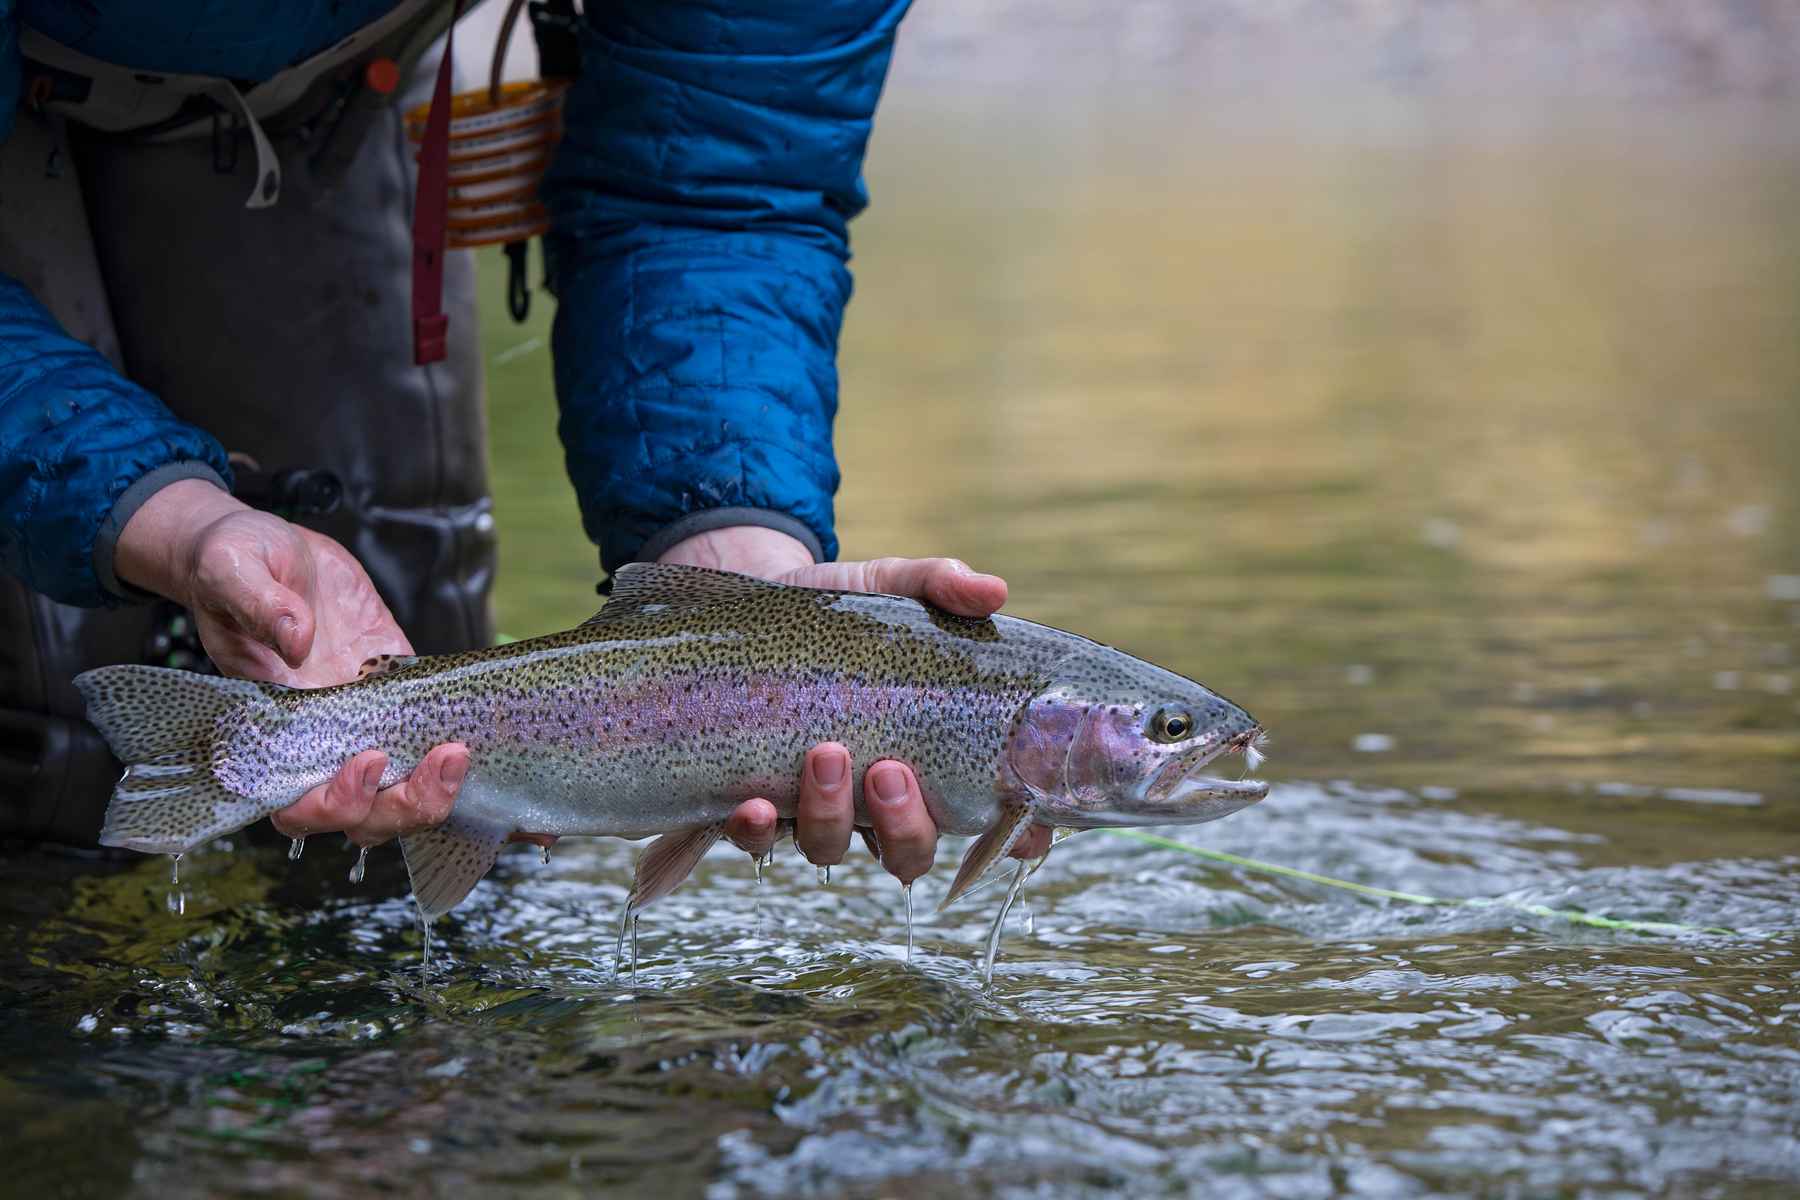 An ode to the Adams, the perfect dry fly